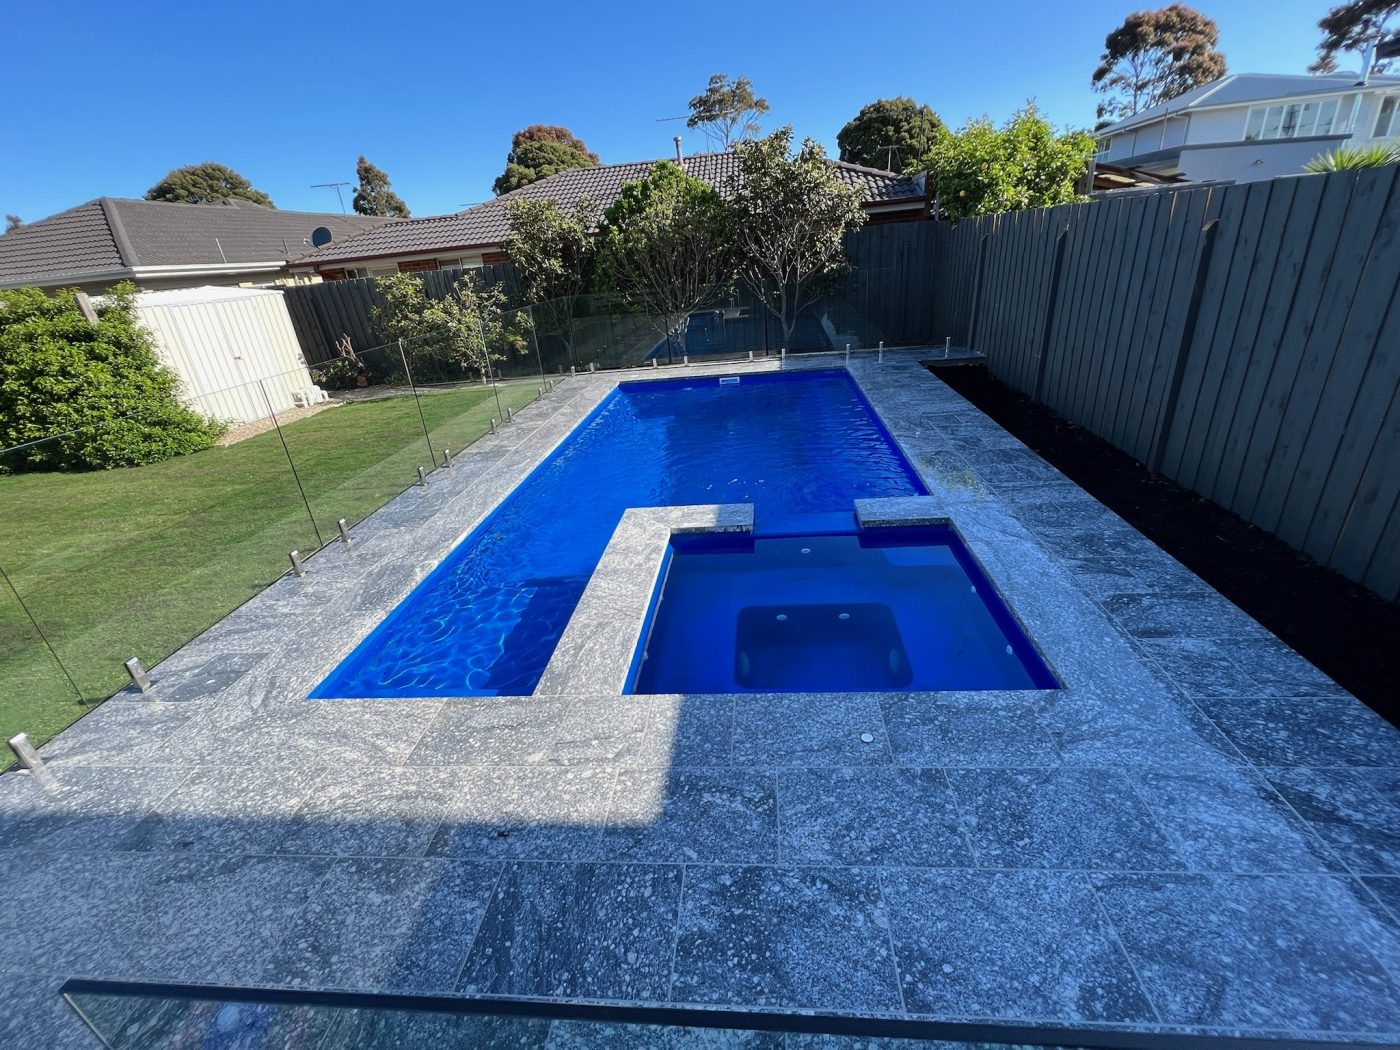 FANTASY-GREY-SANDBLASTED-GRANITE_RMS-TRADERS_NATURAL-STONE-PAVERS-POOL-COPING-SUPPLIER-MELBOURNE-23-scaled